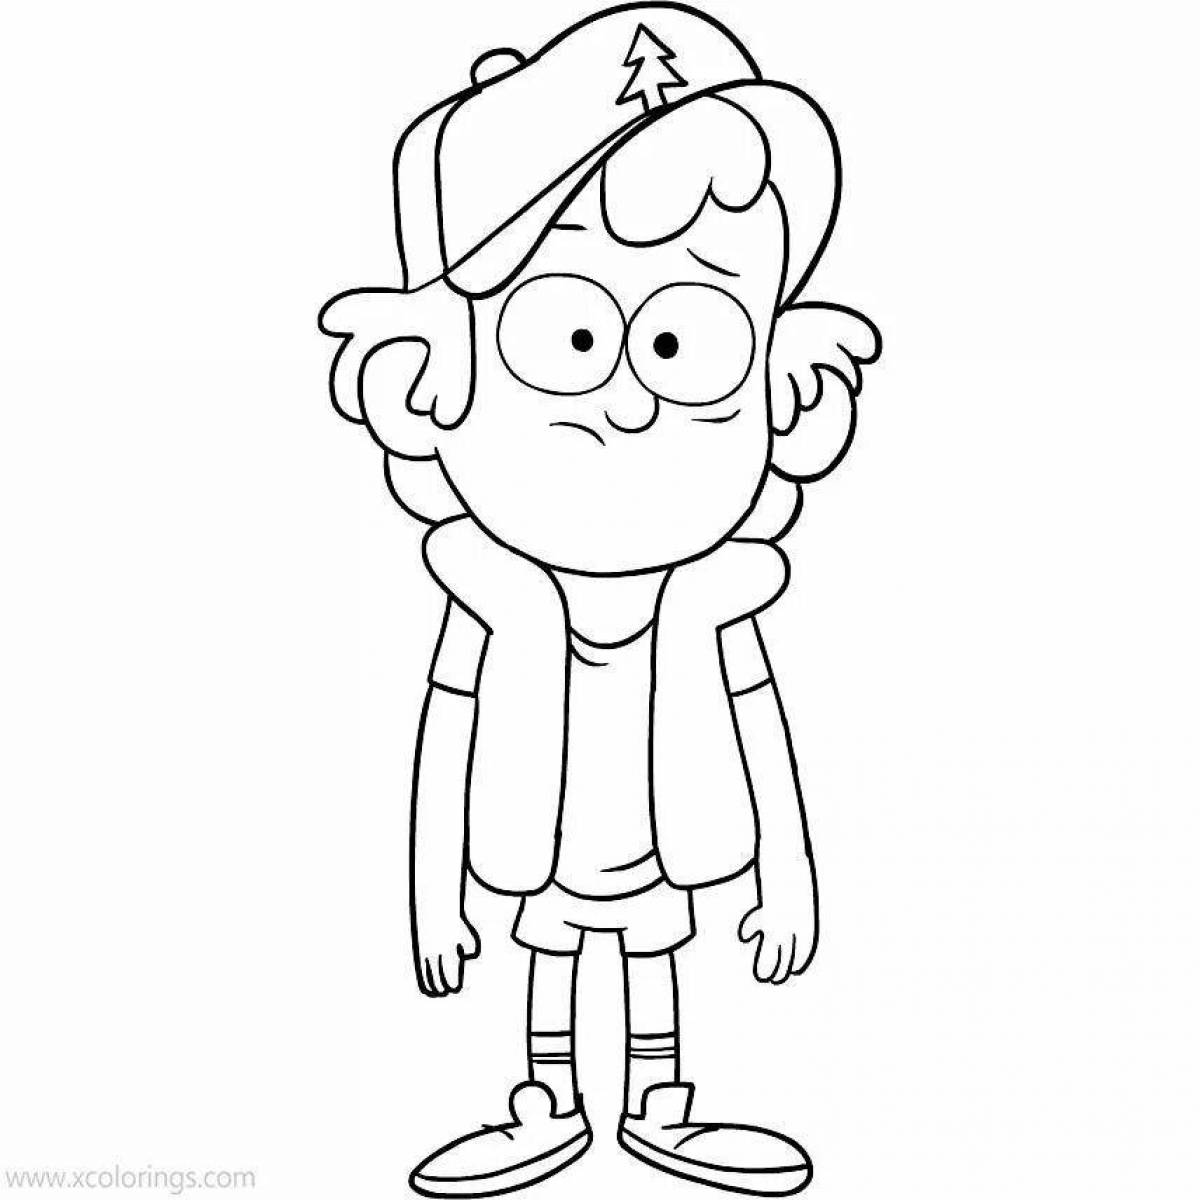 Dipper Gravity Falls Bright Coloring Page